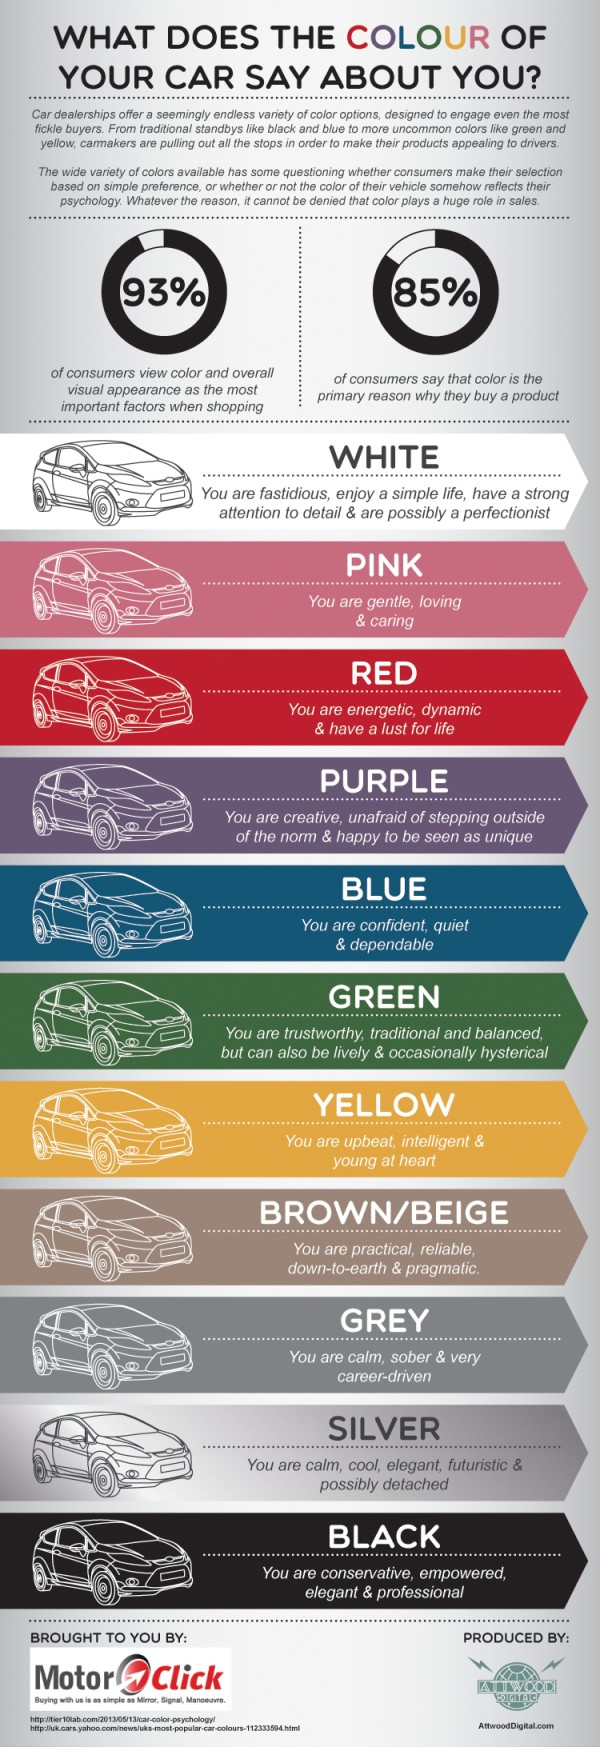 What Does the Colour of Your Car Say About You? infographic